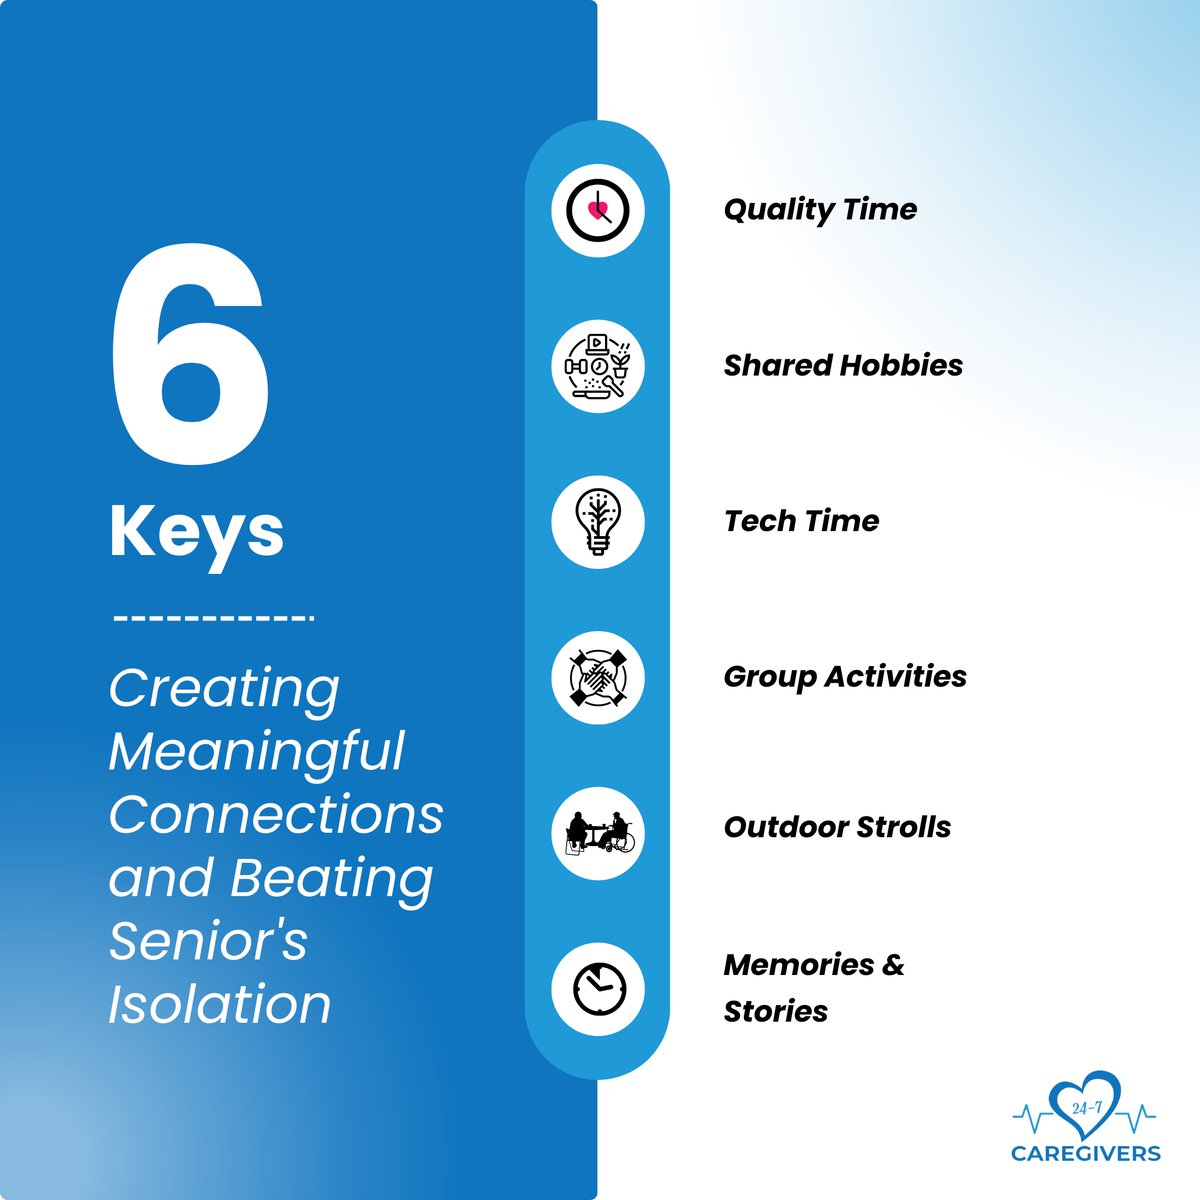 🌟 Creating Meaningful Connections with Seniors 🌟

#caregiver #caregivingtips #BeatIsolation #seniorconnections #CompanionshipMatters